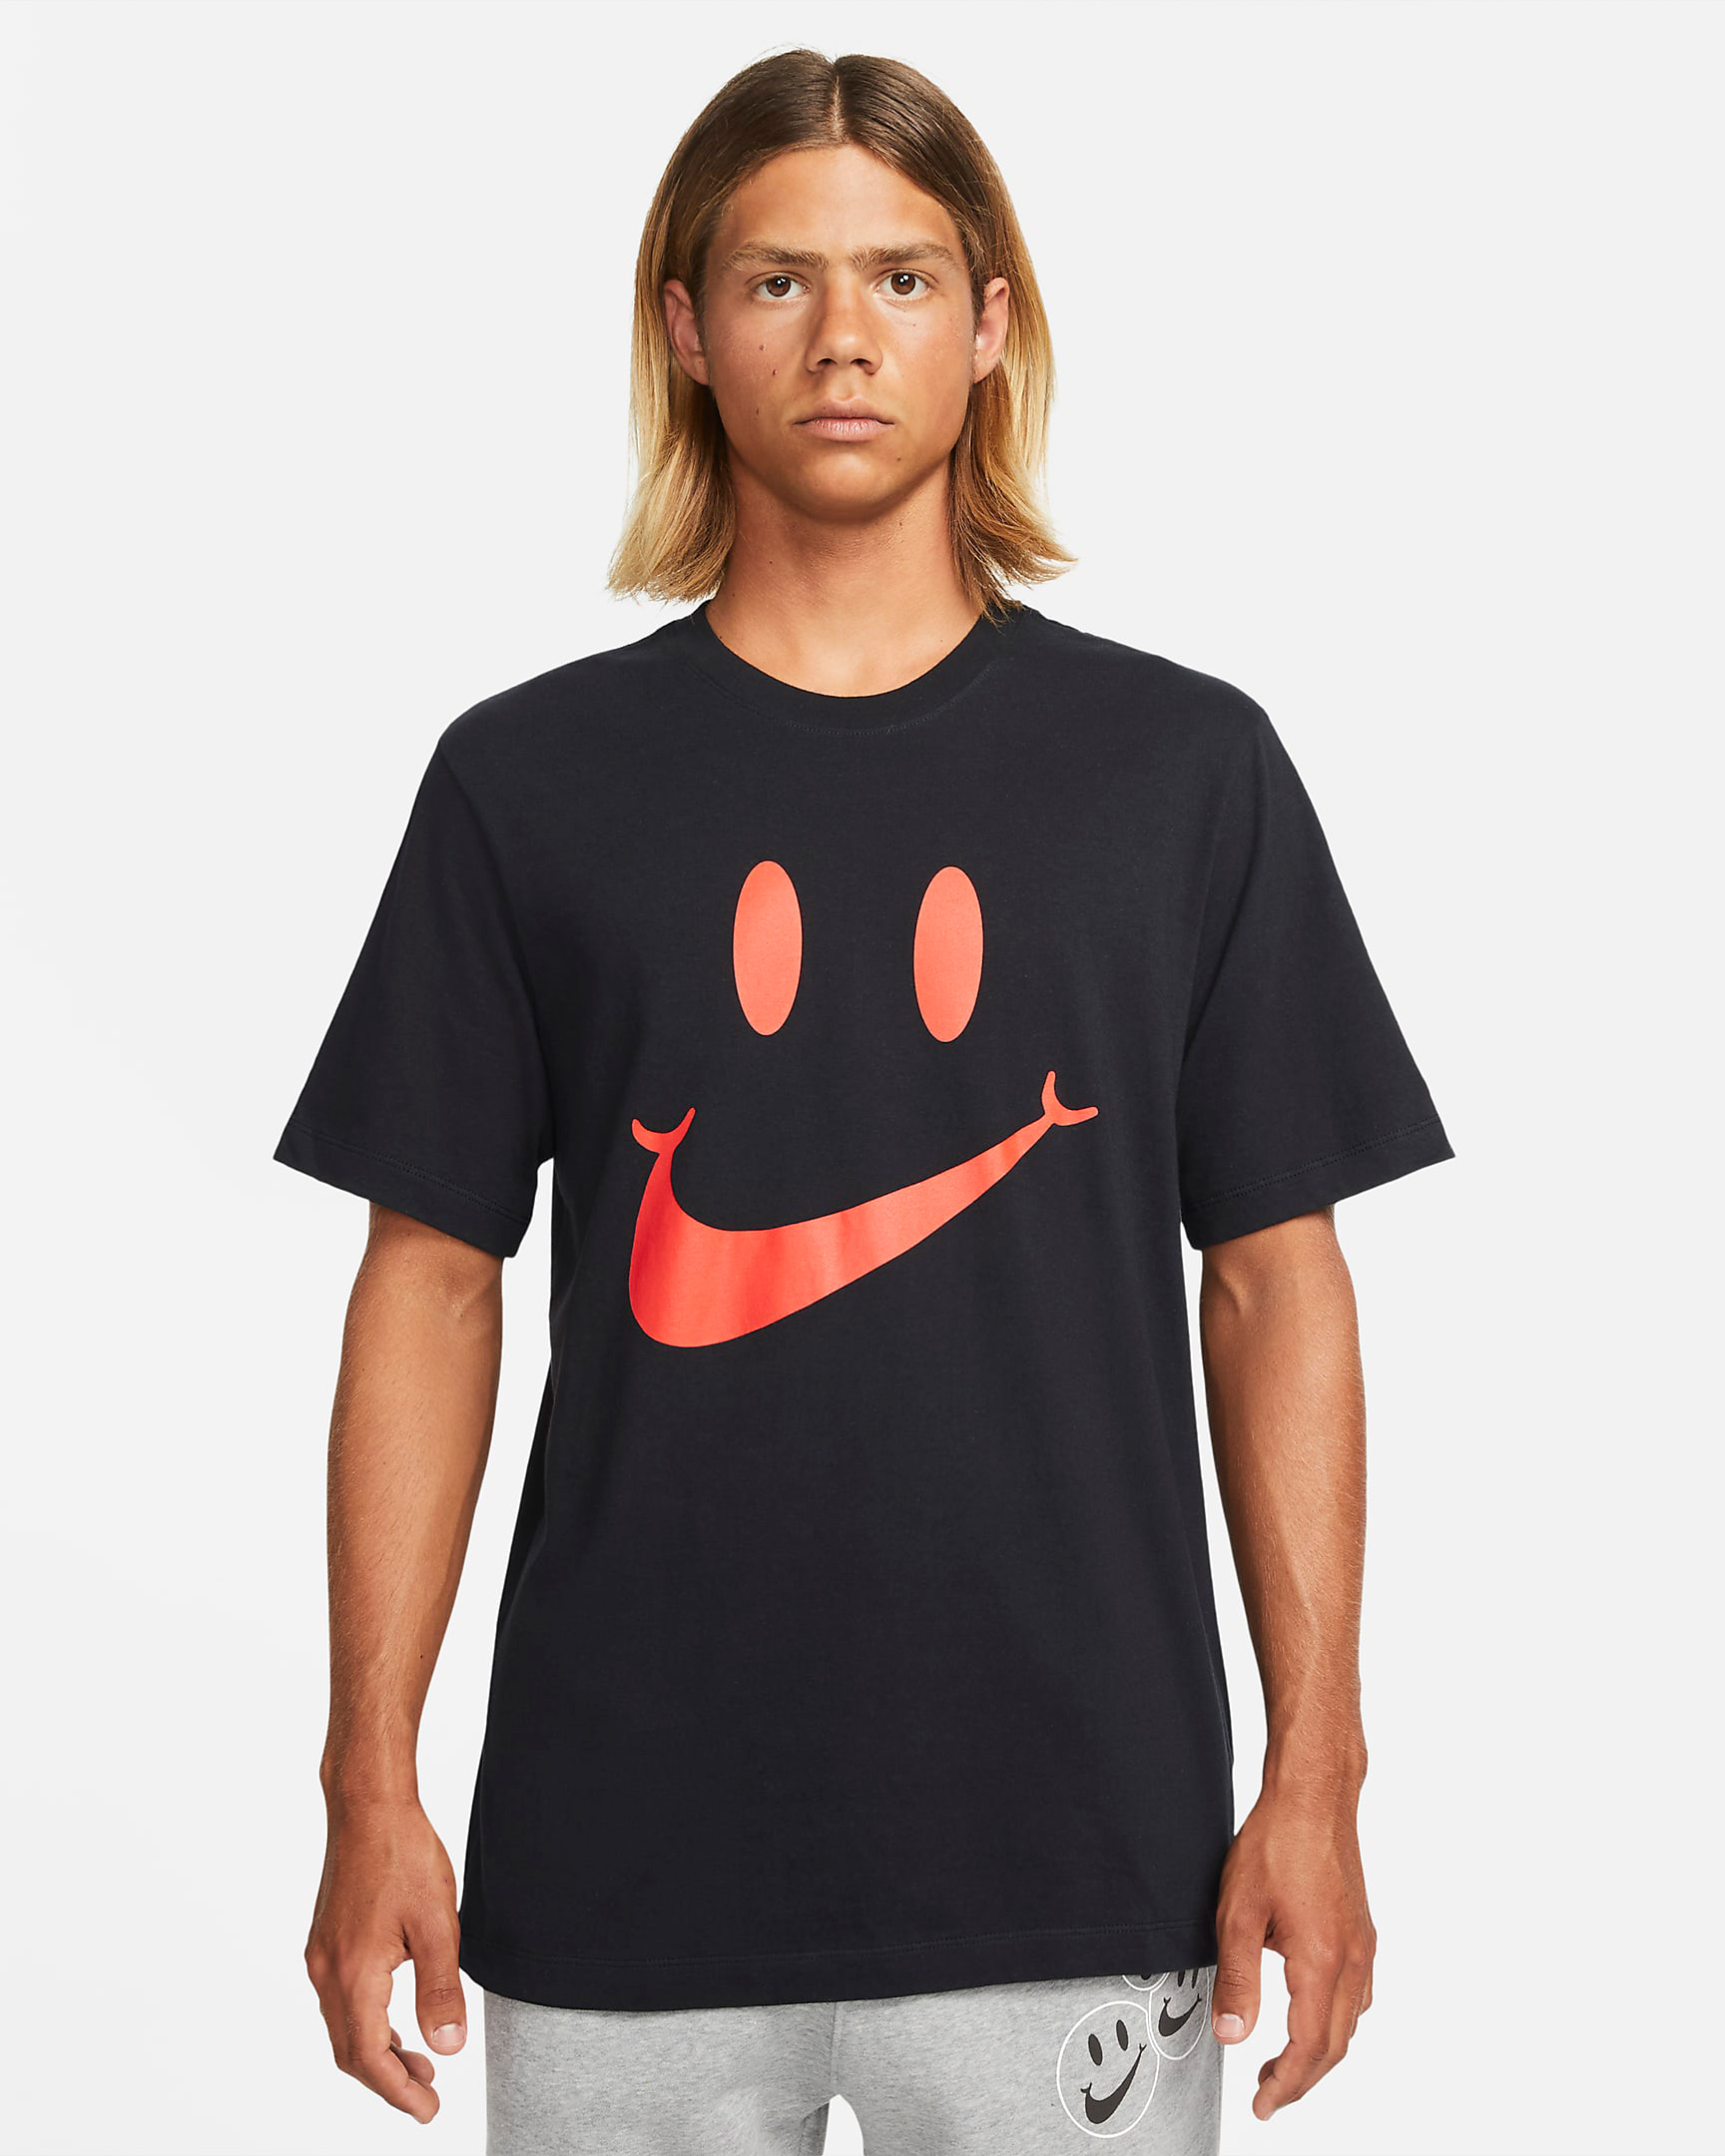 nike-go-the-extra-smile-shirt-black-red-1